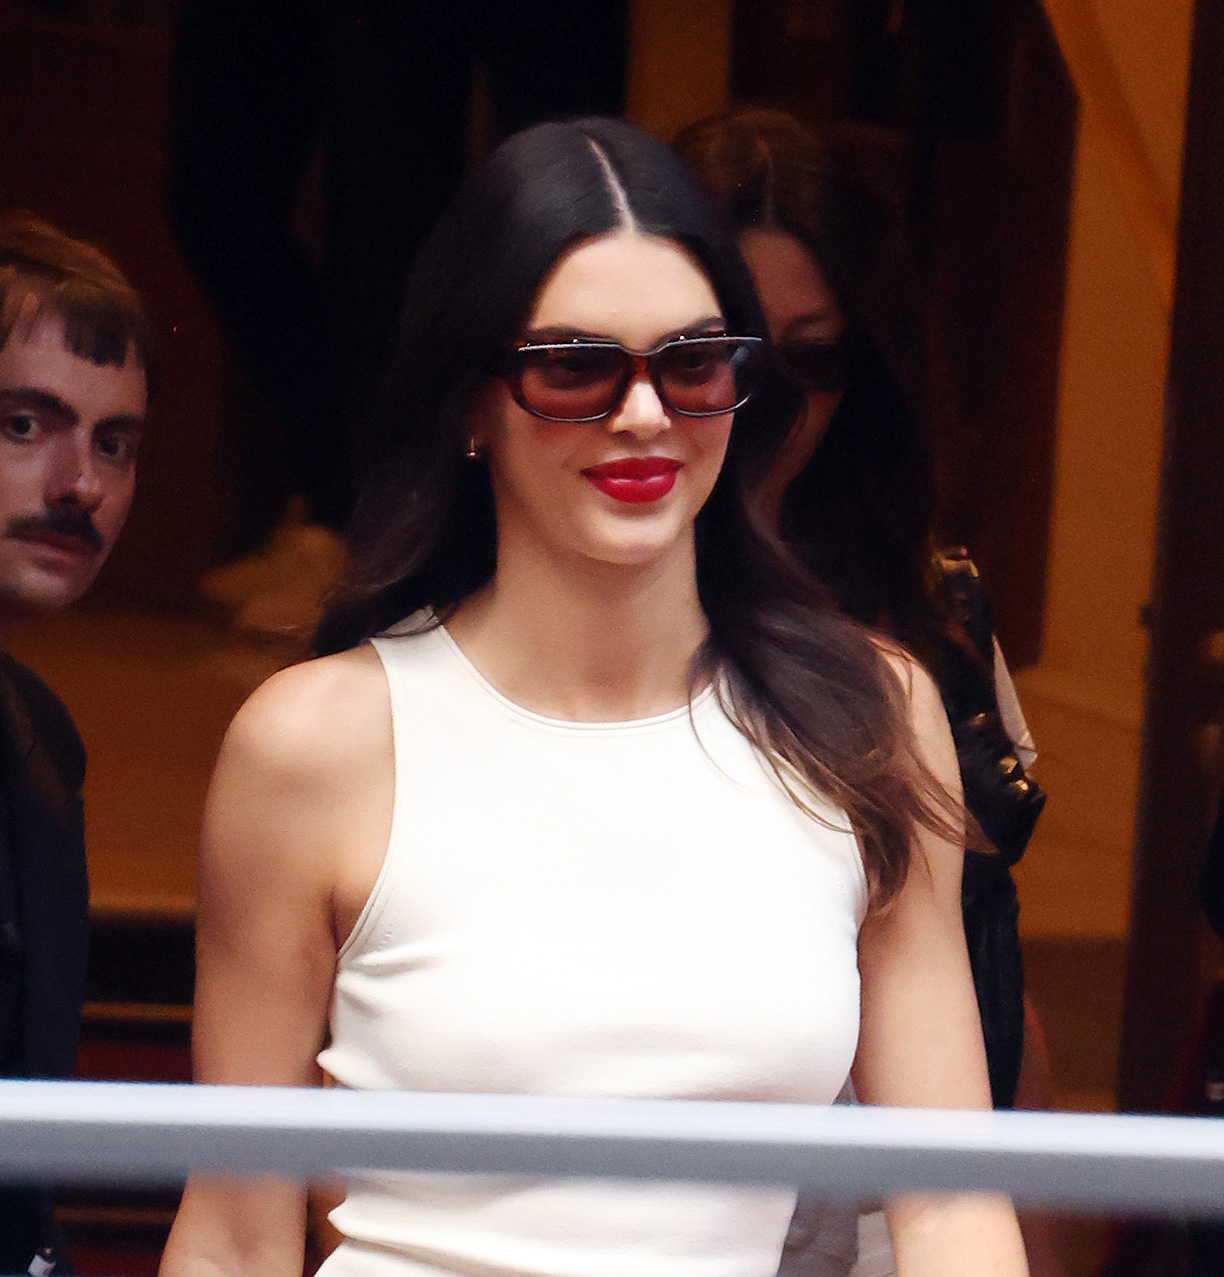 Soffe Shorts, Who? Kendall Jenner Just Wore The Row-Like Style Replacing Them